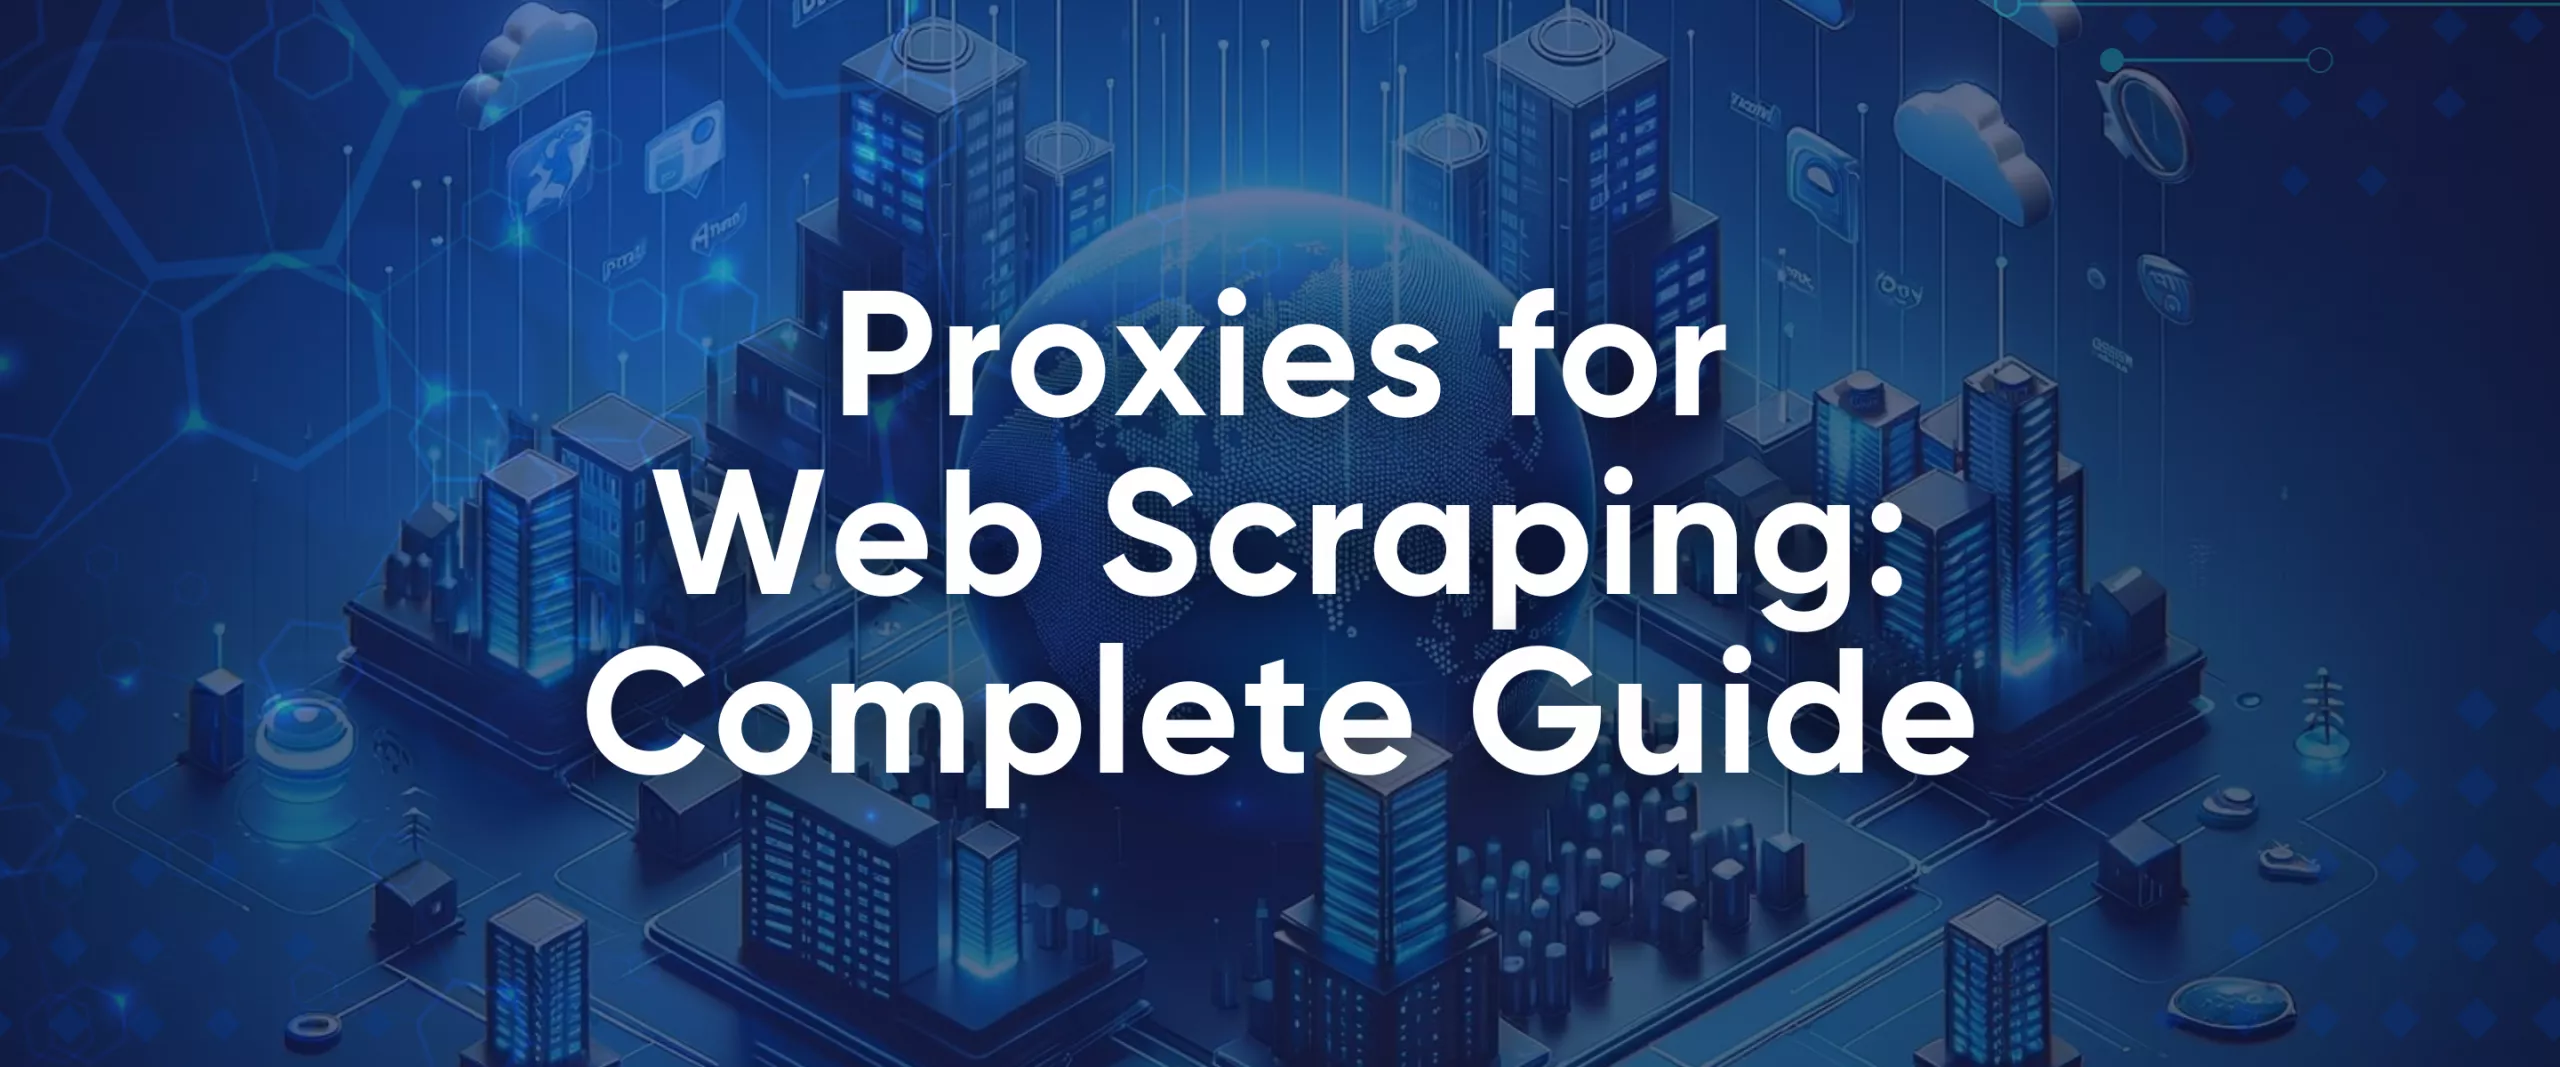 Proxies for Web Scraping - The Complete Guide